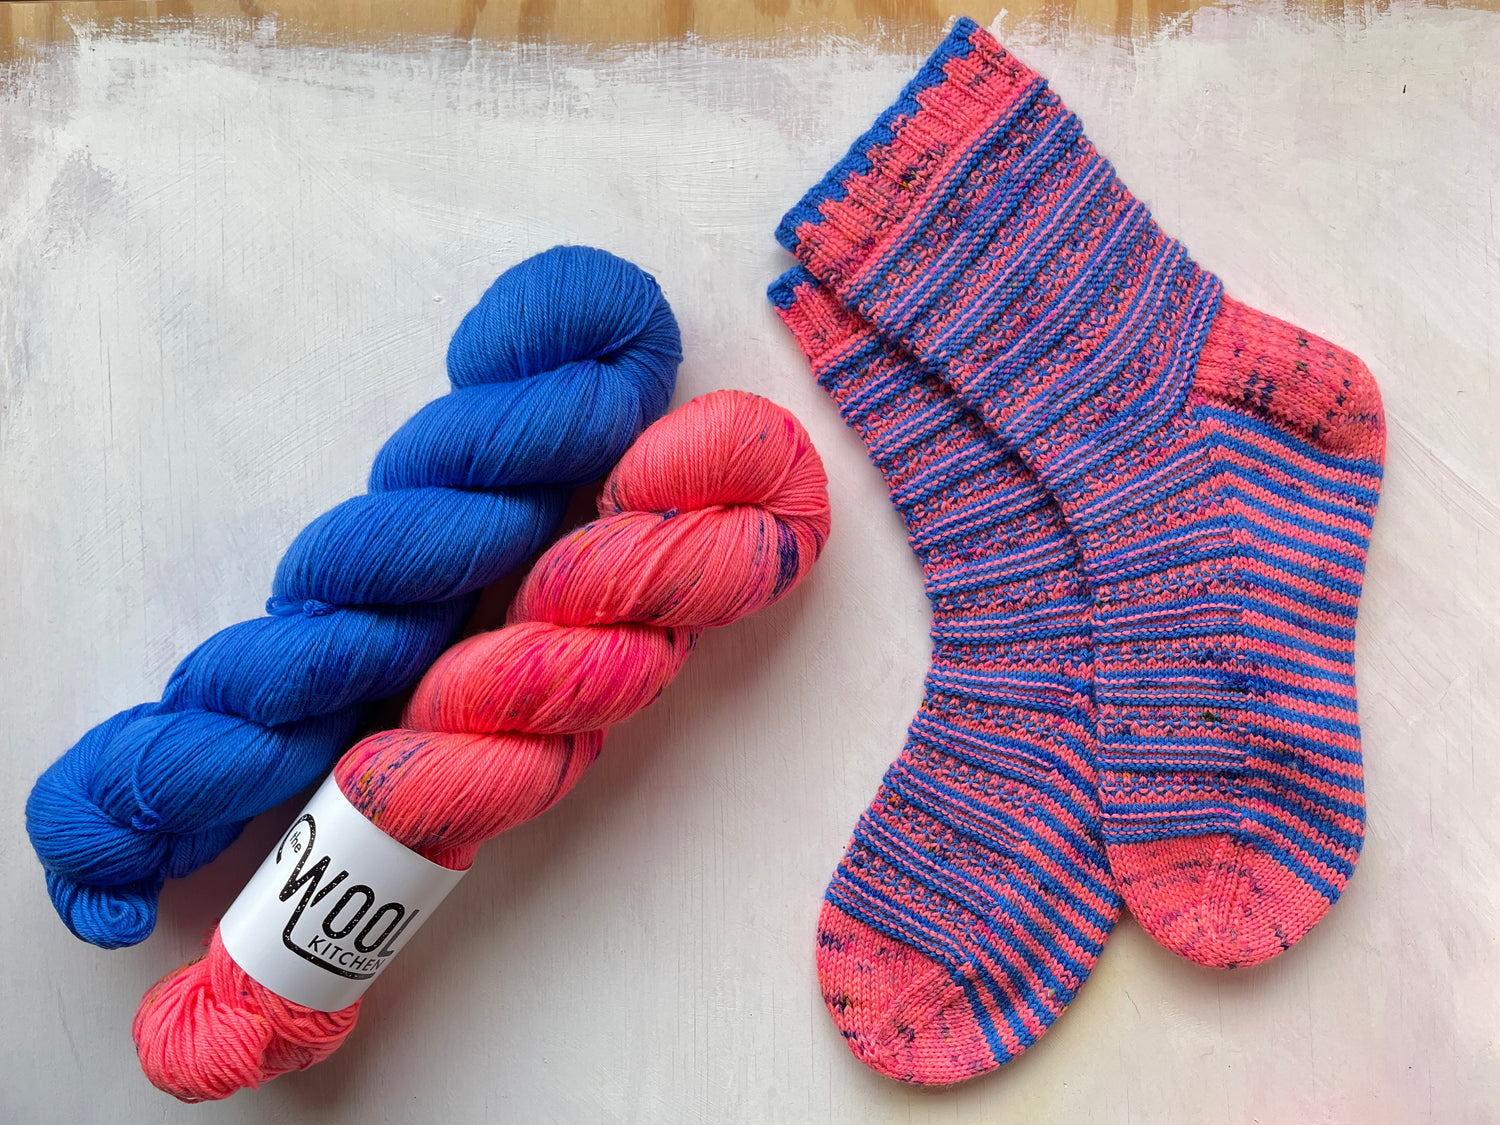 Socks! 4ply sock yarn sets from the hand dyed yarn expert, The Wool Kitchen